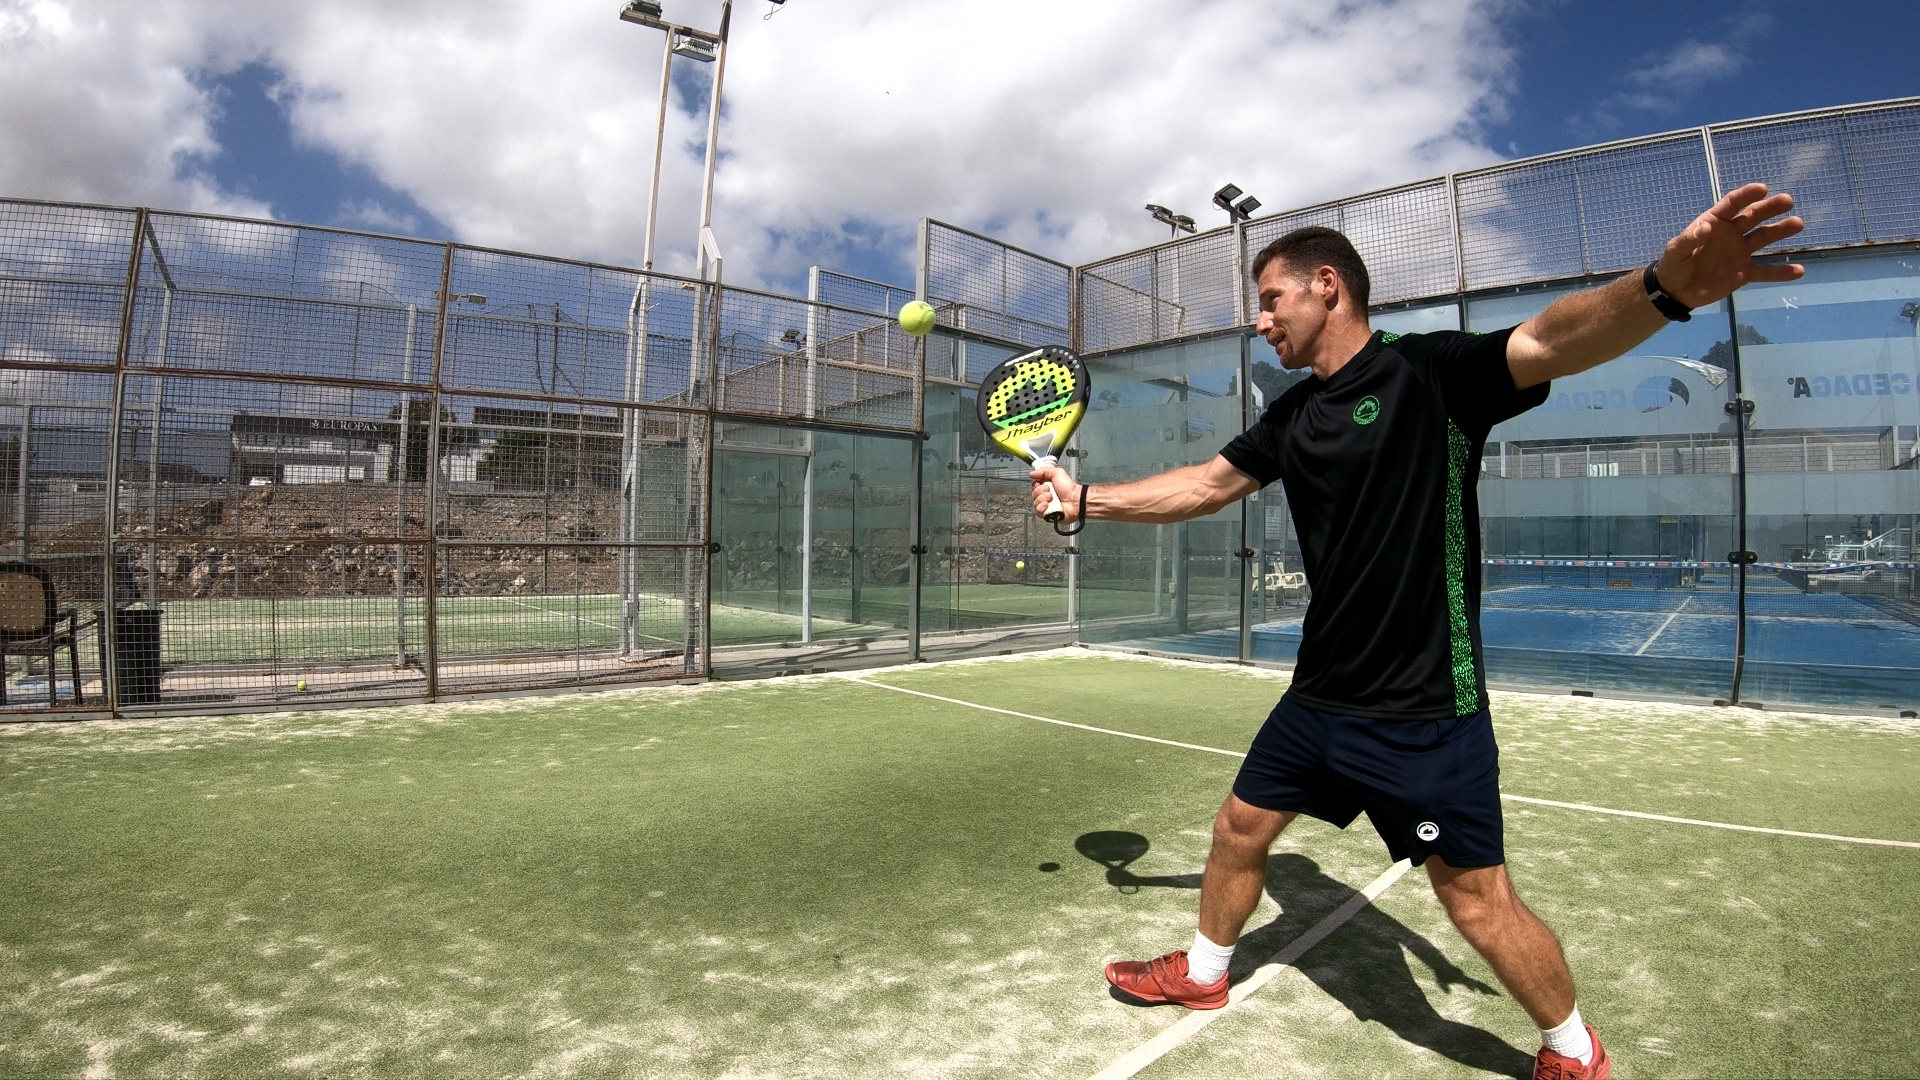 The basics: the forehand volley